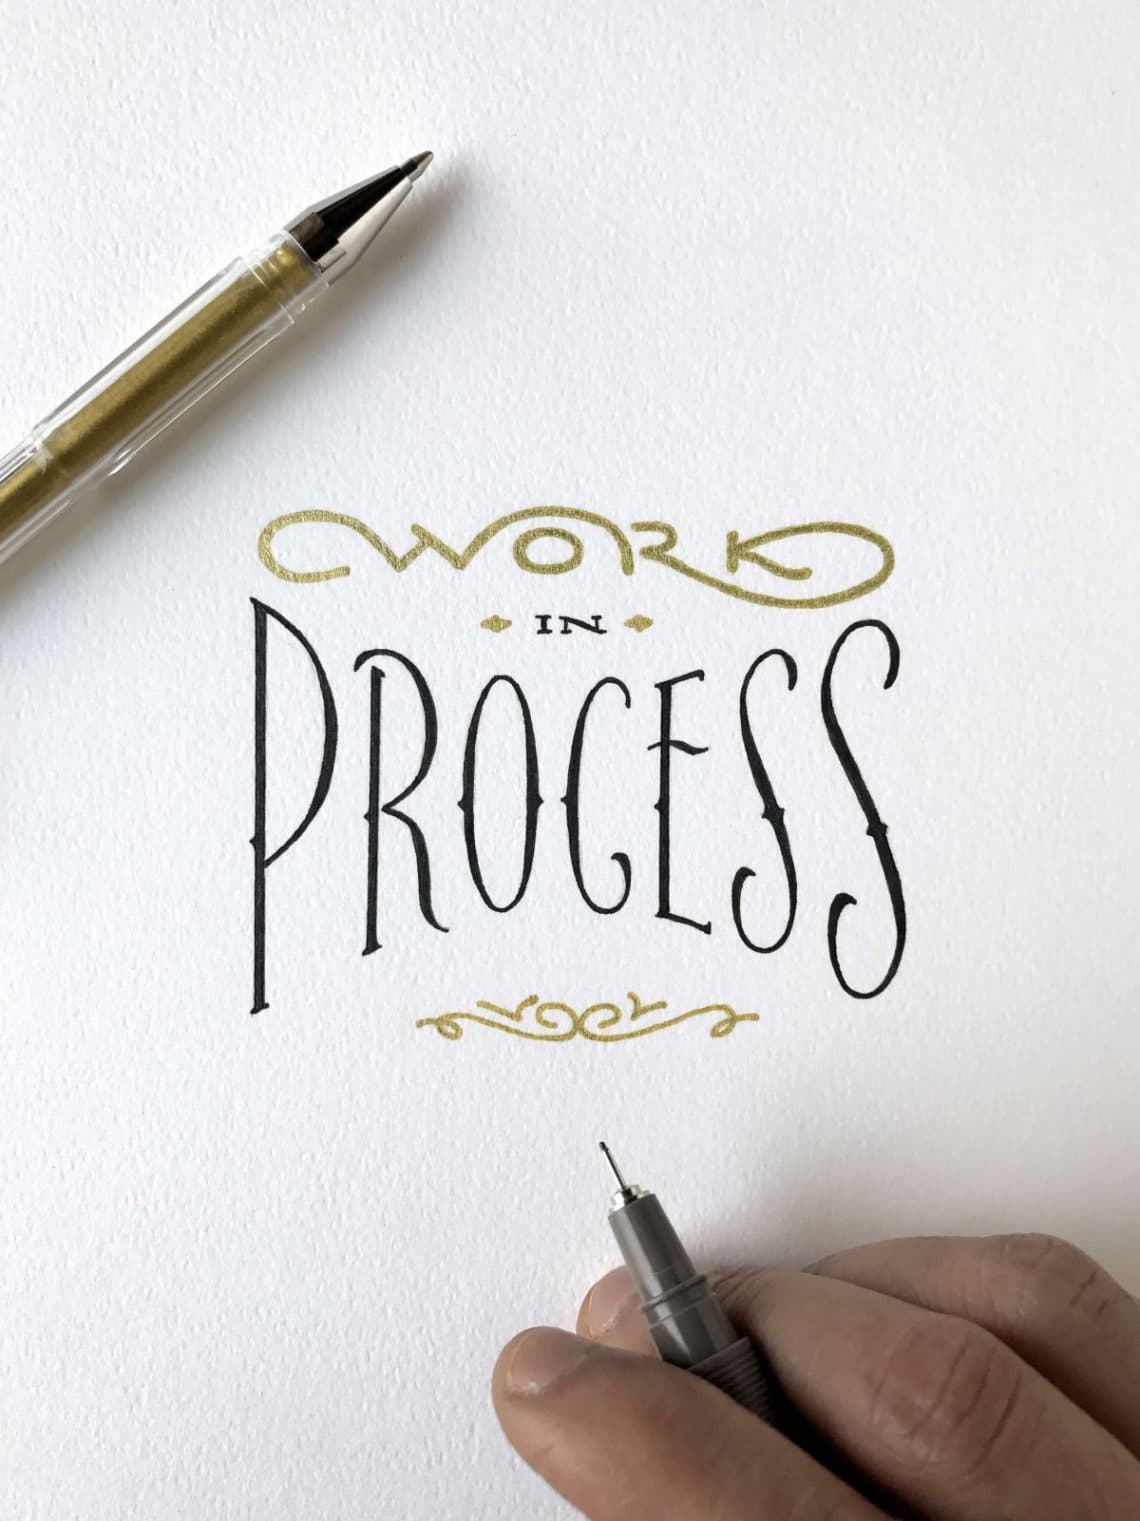 Creating hand lettering in 8 easy steps - Lettering Daily